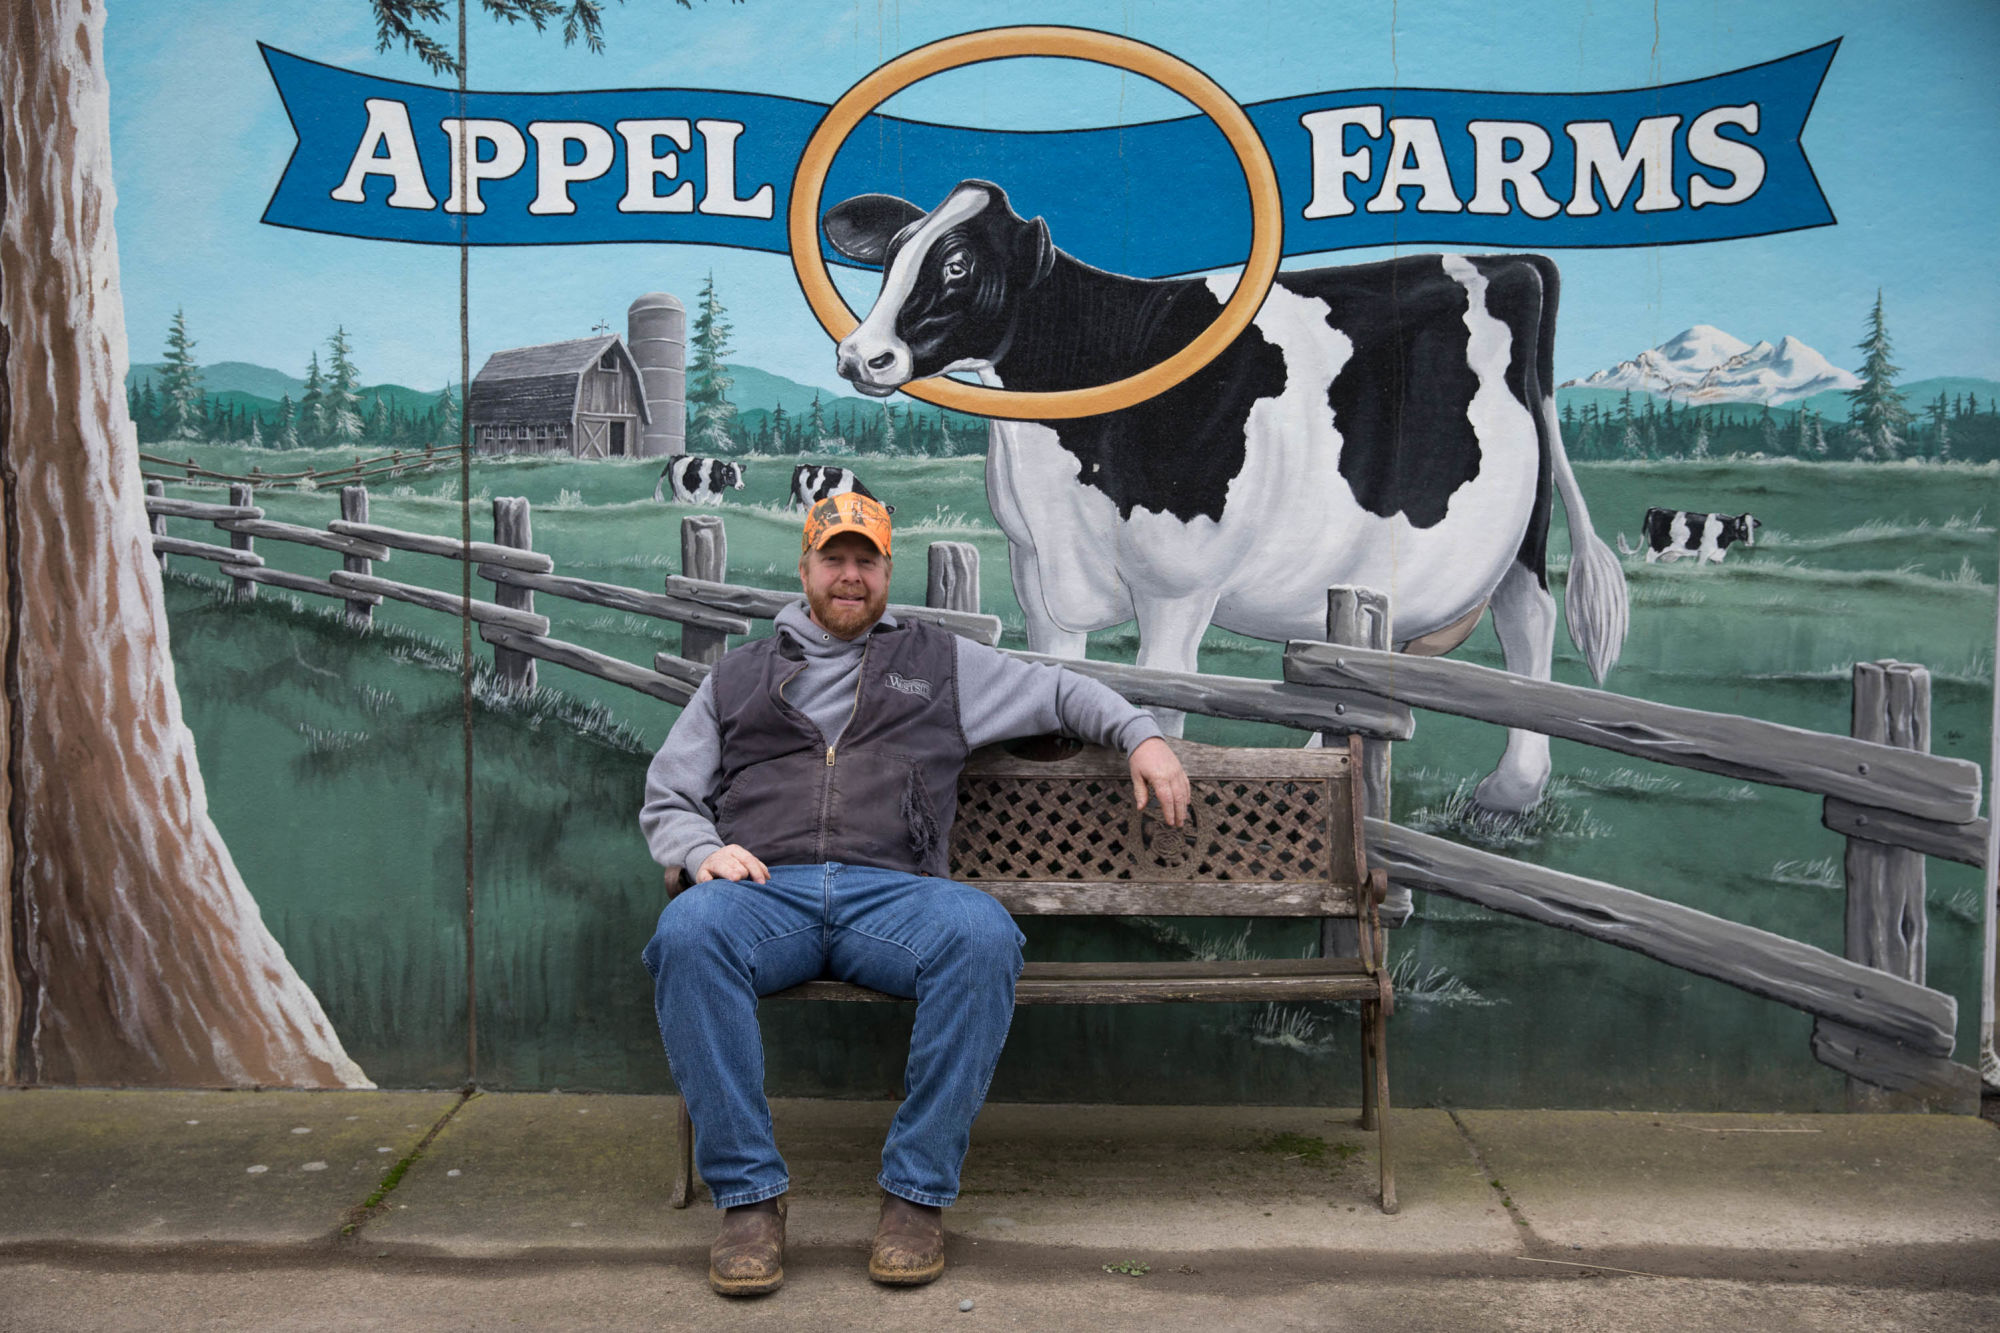 Rich Appel sits in front of a sign for the original cheese plant at Appel Farms near Ferndale, Washington. As their operation has grown over the years, they moved to a larger facility about one hundred yards away, allowing them to produce on a larger scale.